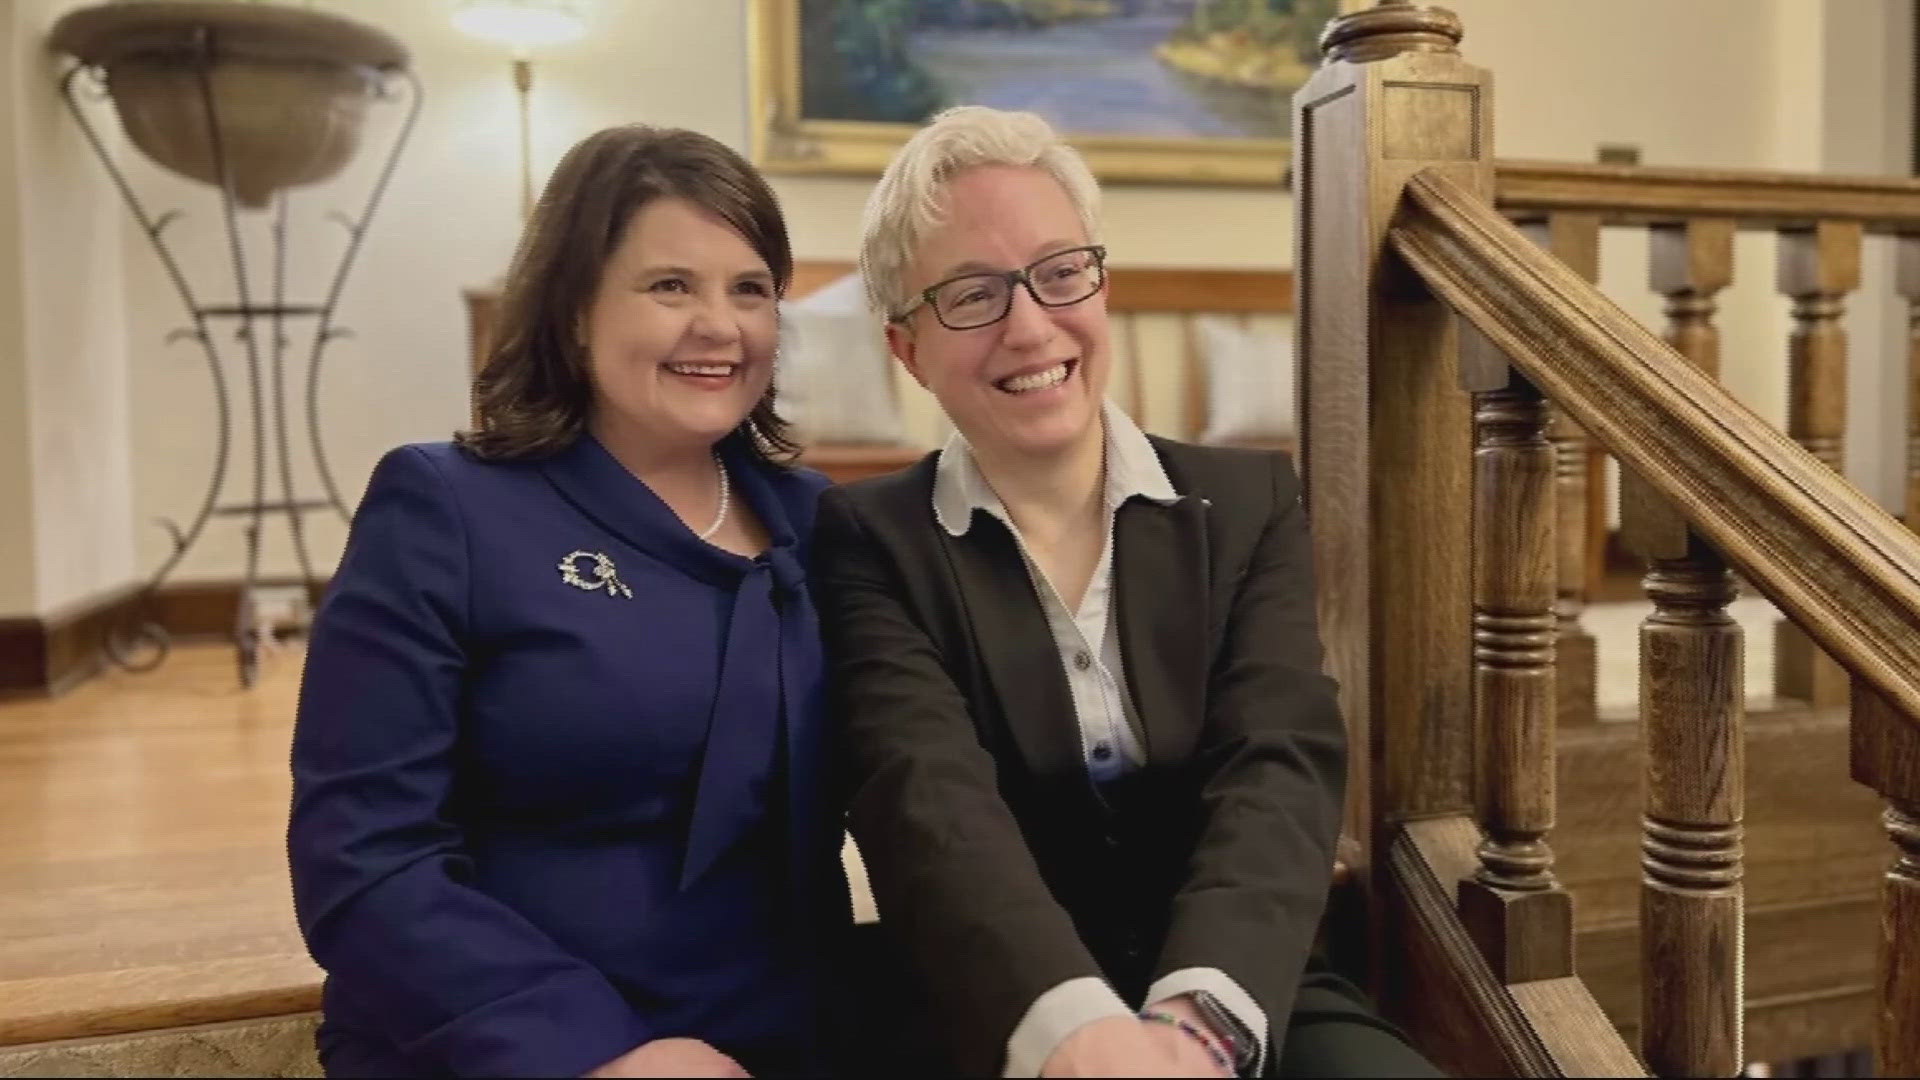 While the governor's wife, Aimee Kotek Wilson, will continue to have a role in the administration, the governor said she won't be expanding that role right now.